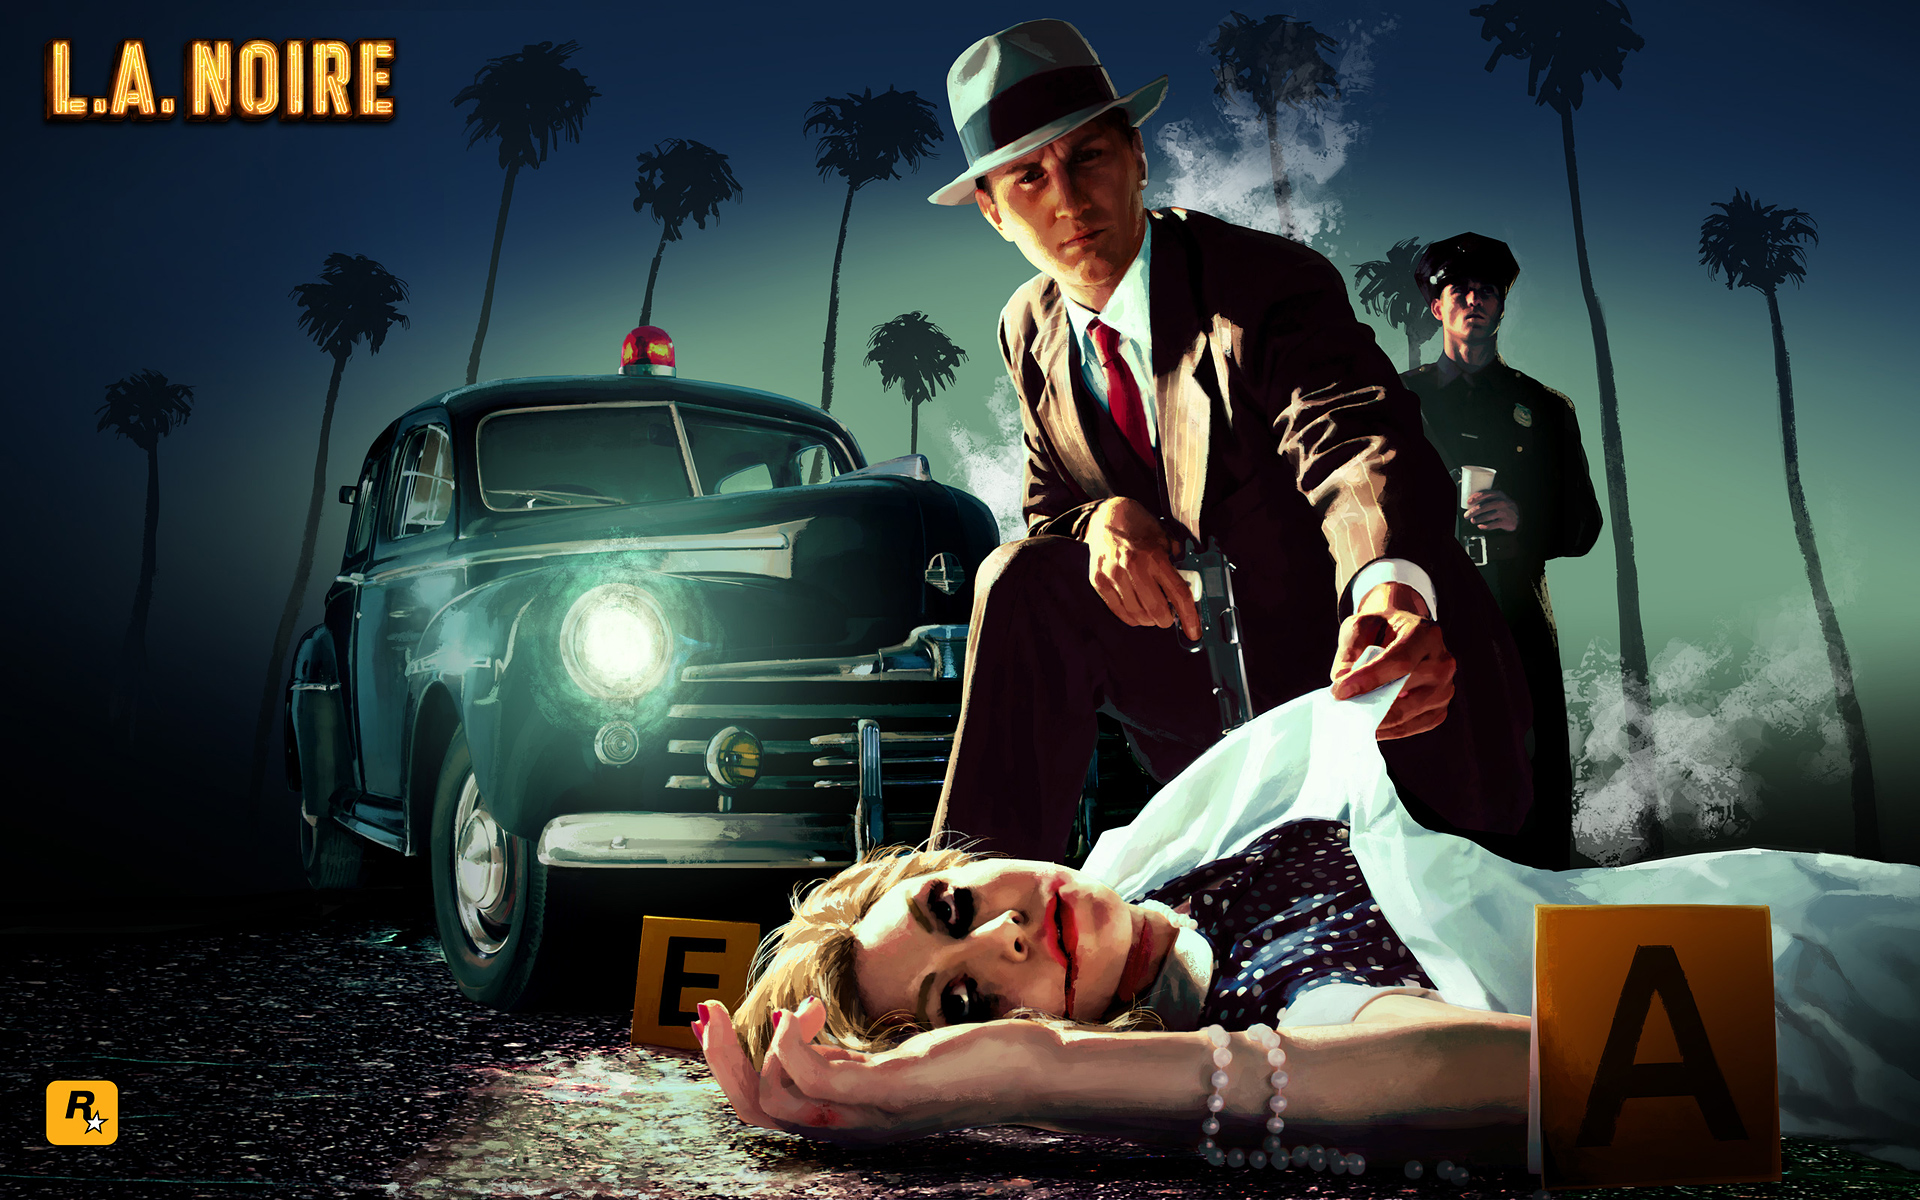 La noire hd papers and backgrounds